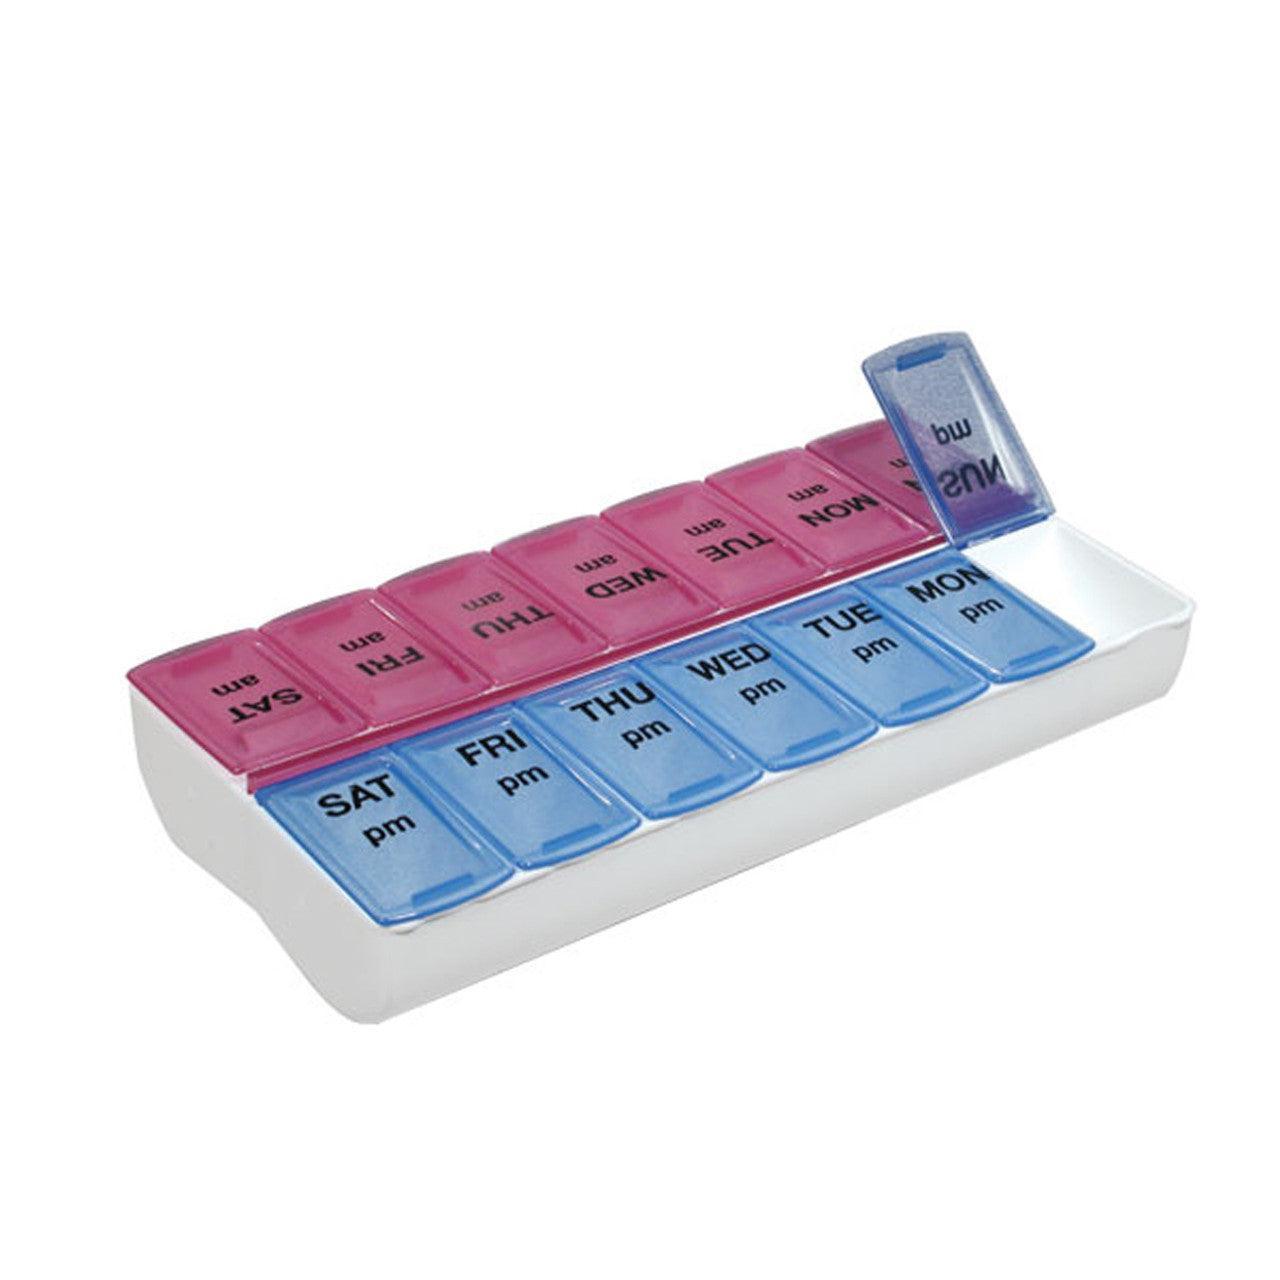 Twice-A-Day Weekly Pill Organizer (Color May Vary) - The Low Vision Store